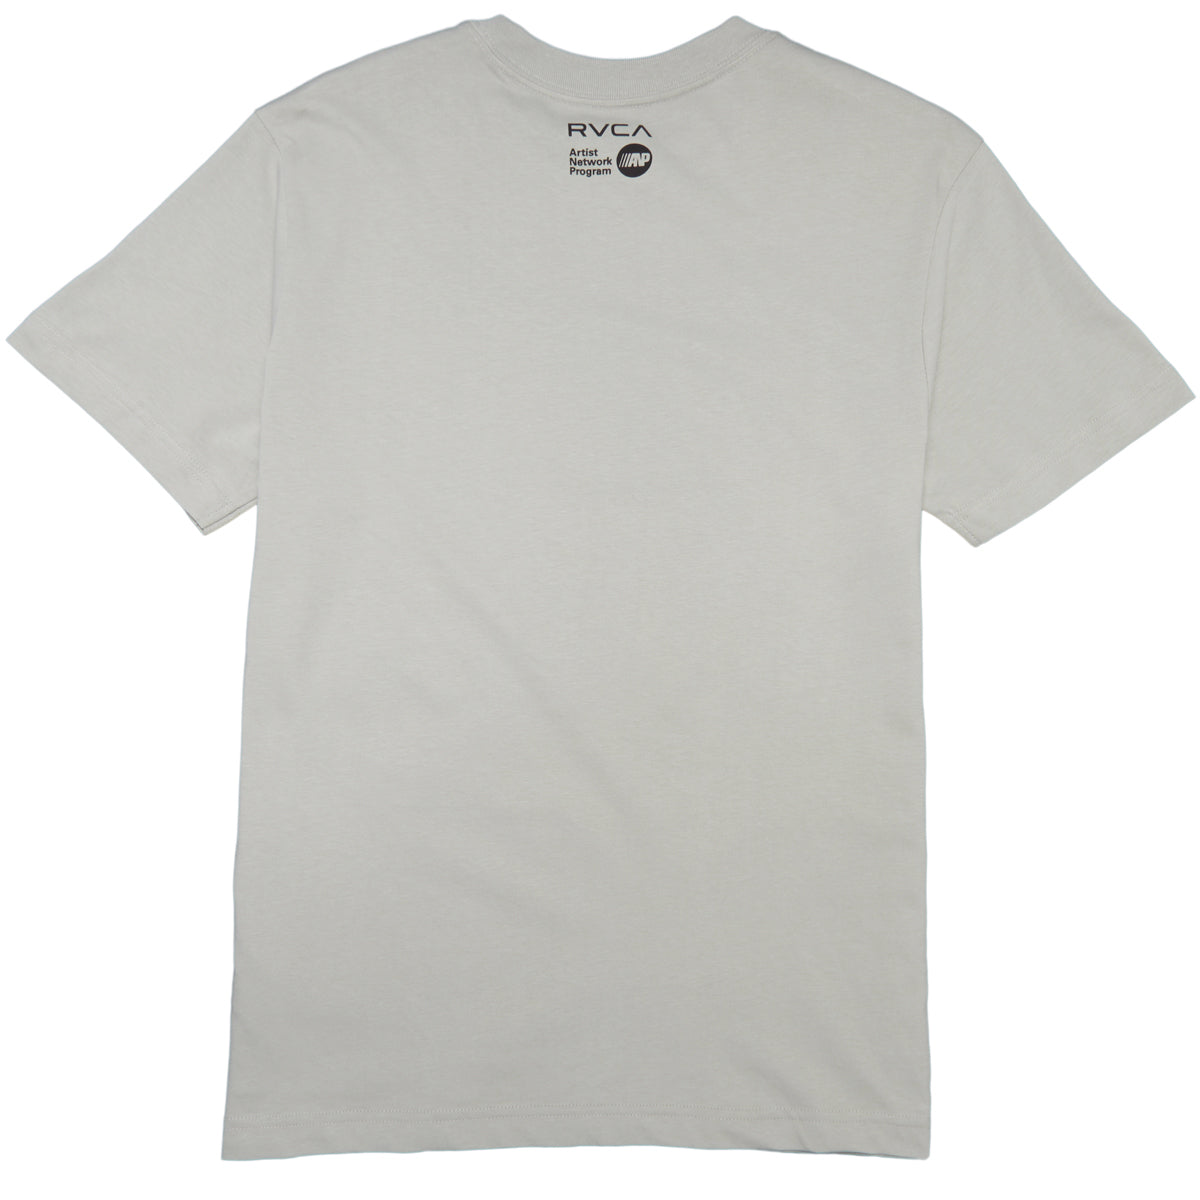 RVCA Trip Out T-Shirt - Mirage image 2